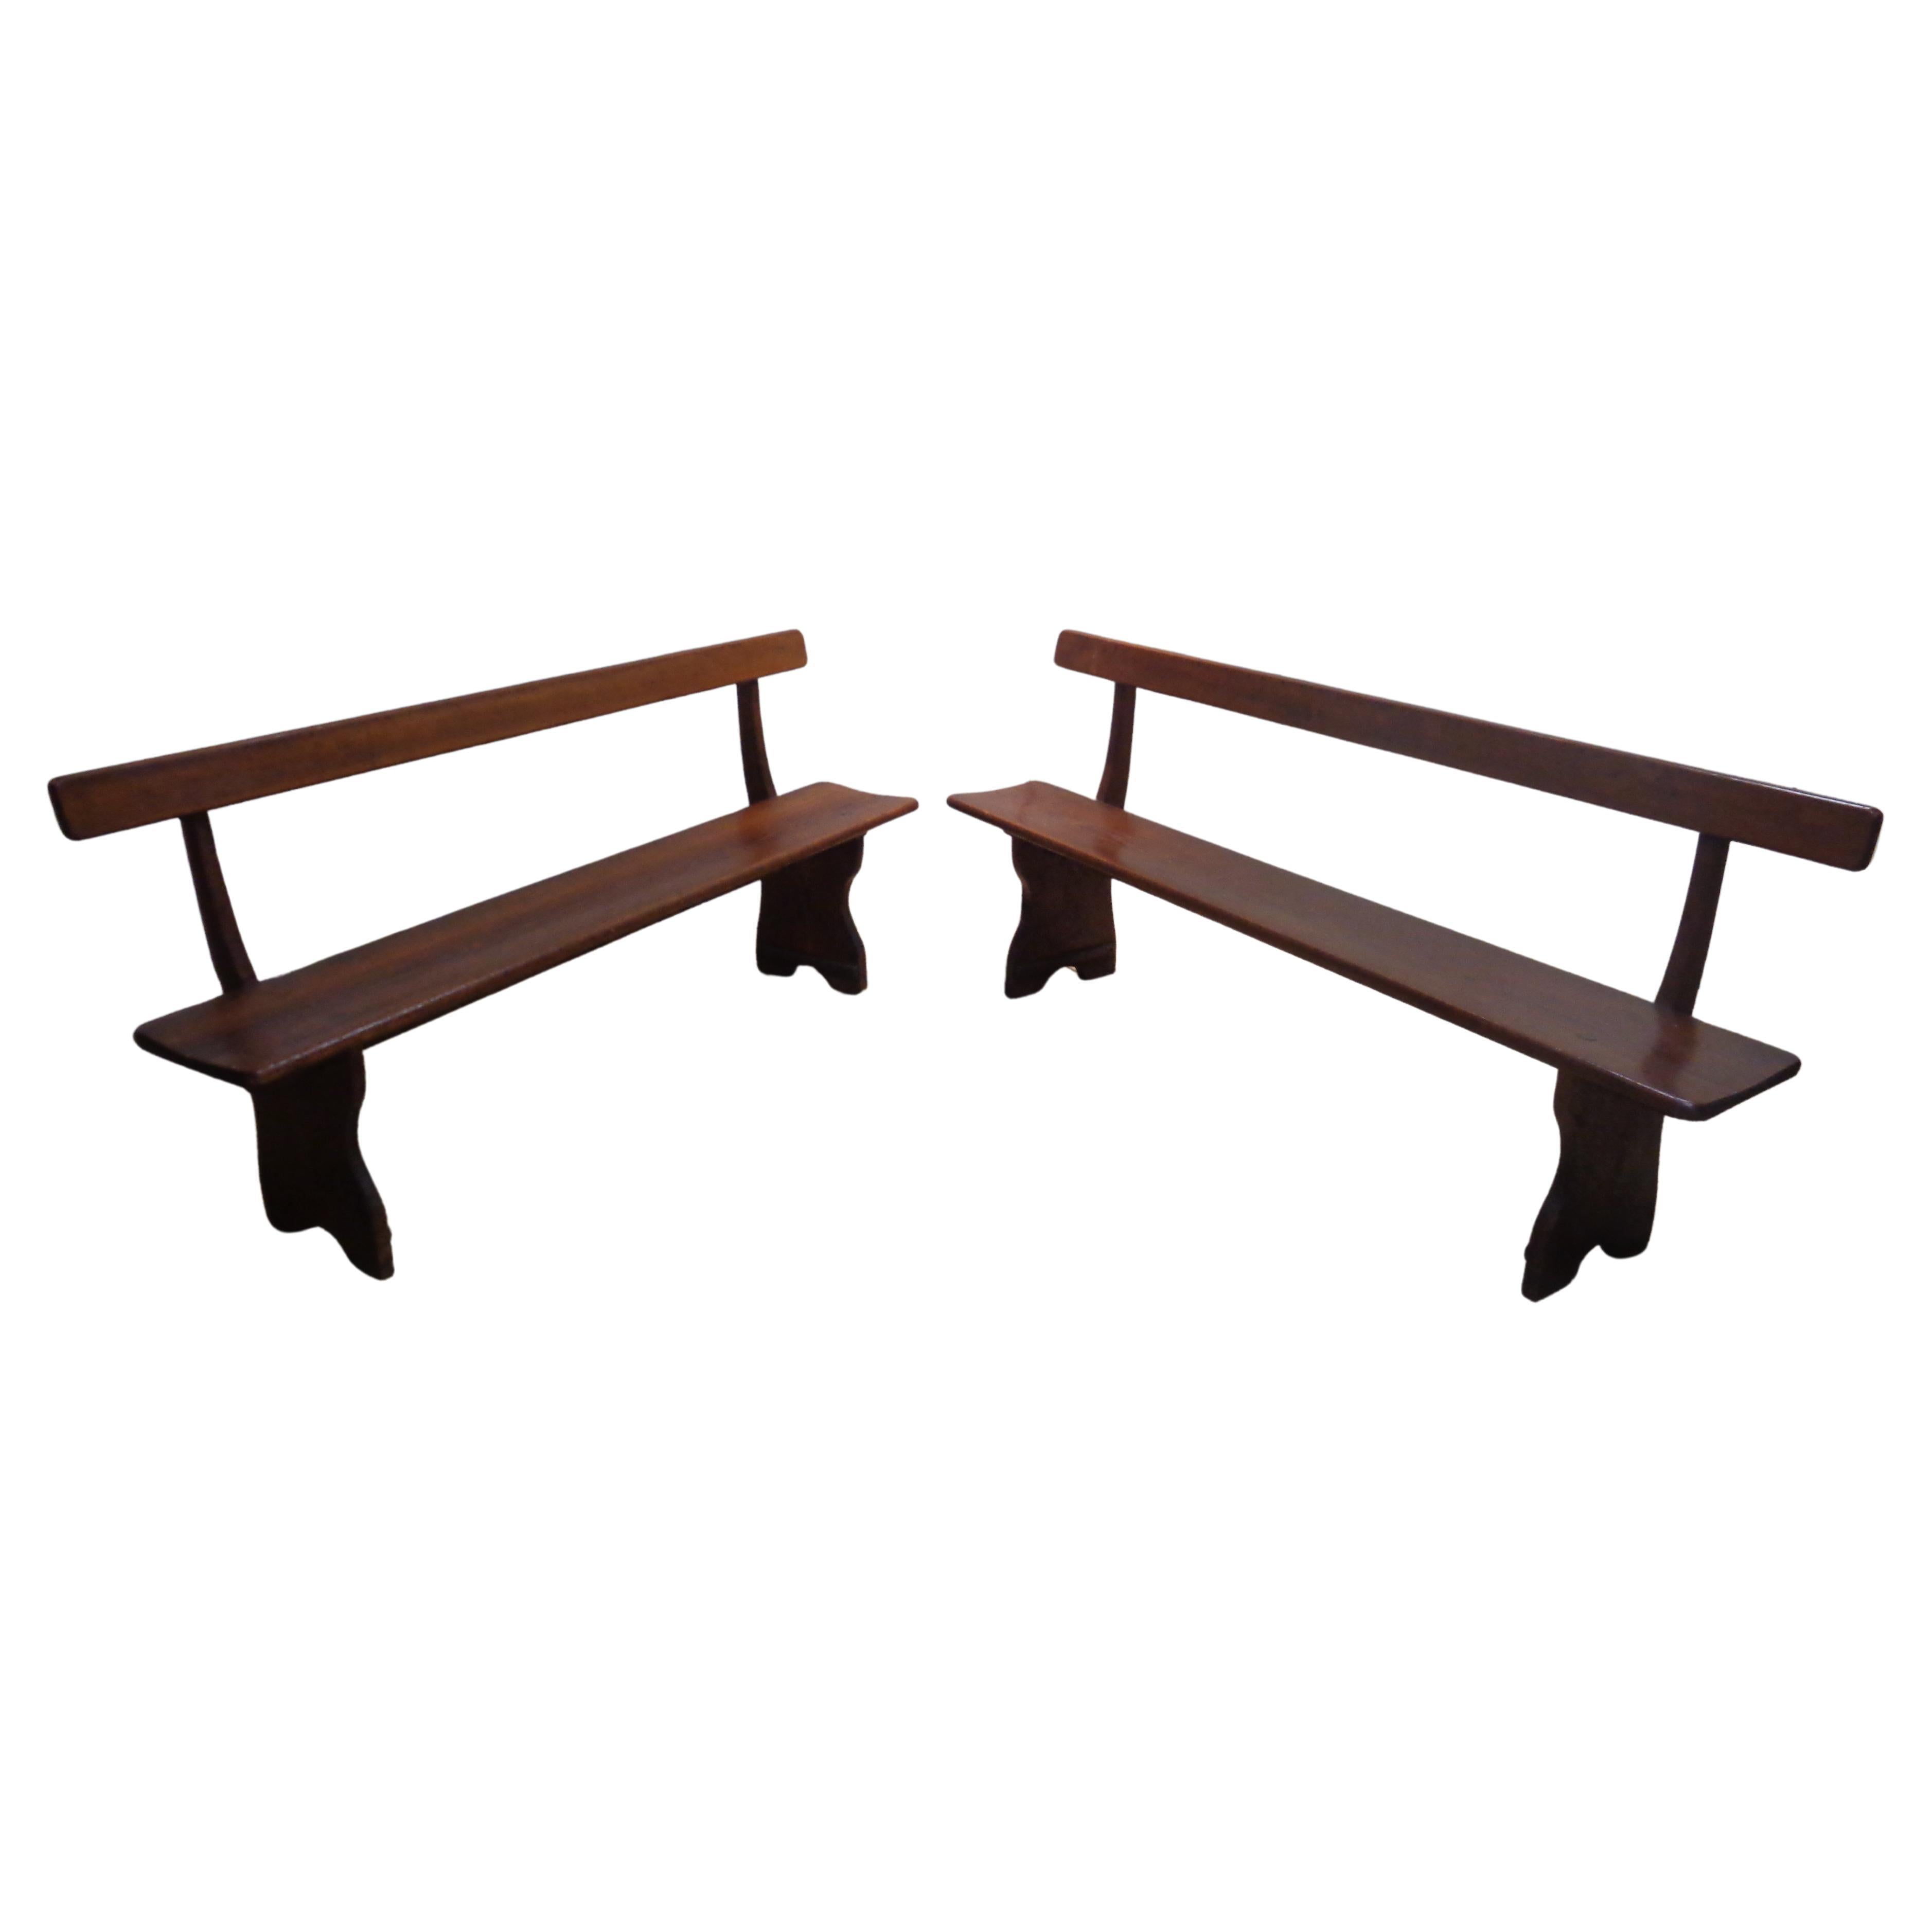 Exceptional pair of antique American country stained yellow pine hardwood benches w/ fine hand crafted dowel pegged construction / nicely grained / beautifully aged original rich color patina / graceful elongated sculptural form. One bench is 72